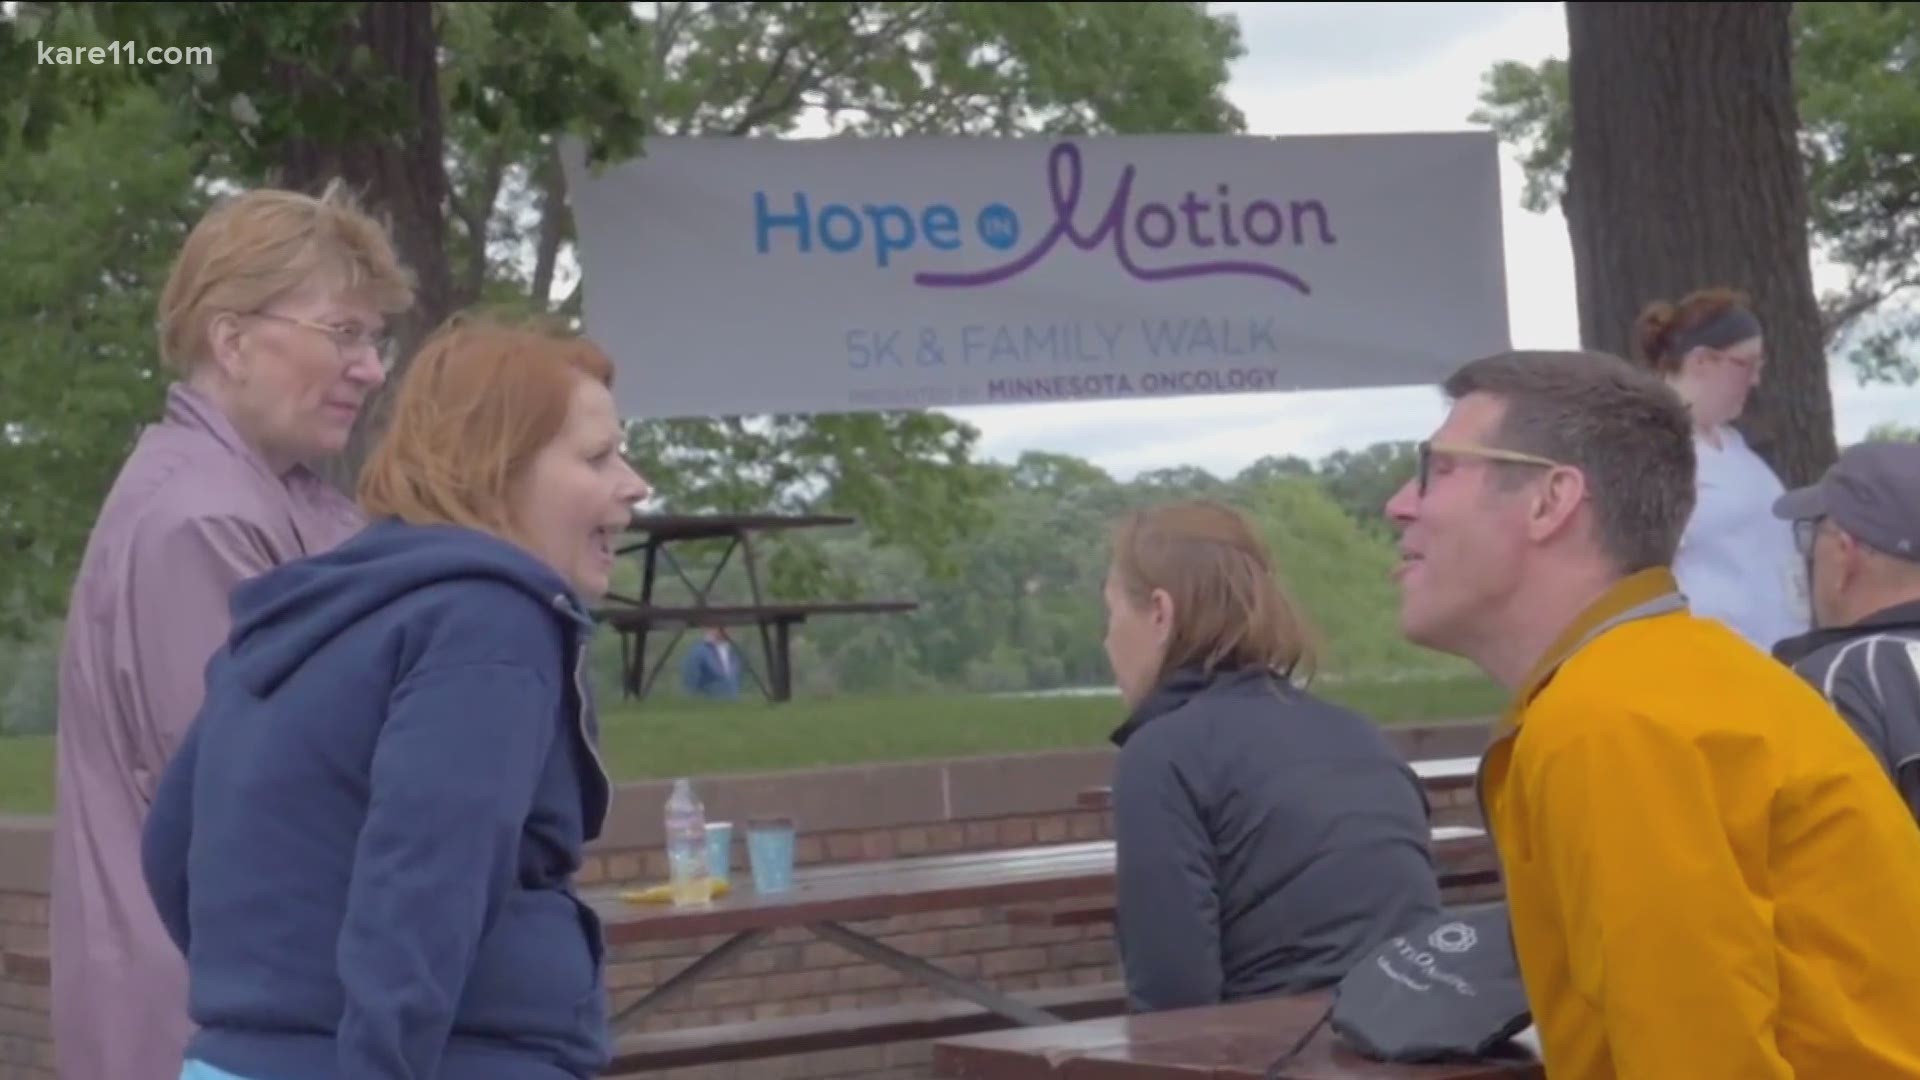 Hope in Motion is an annual 5k to raise money and help to support those battling cancer and their families.